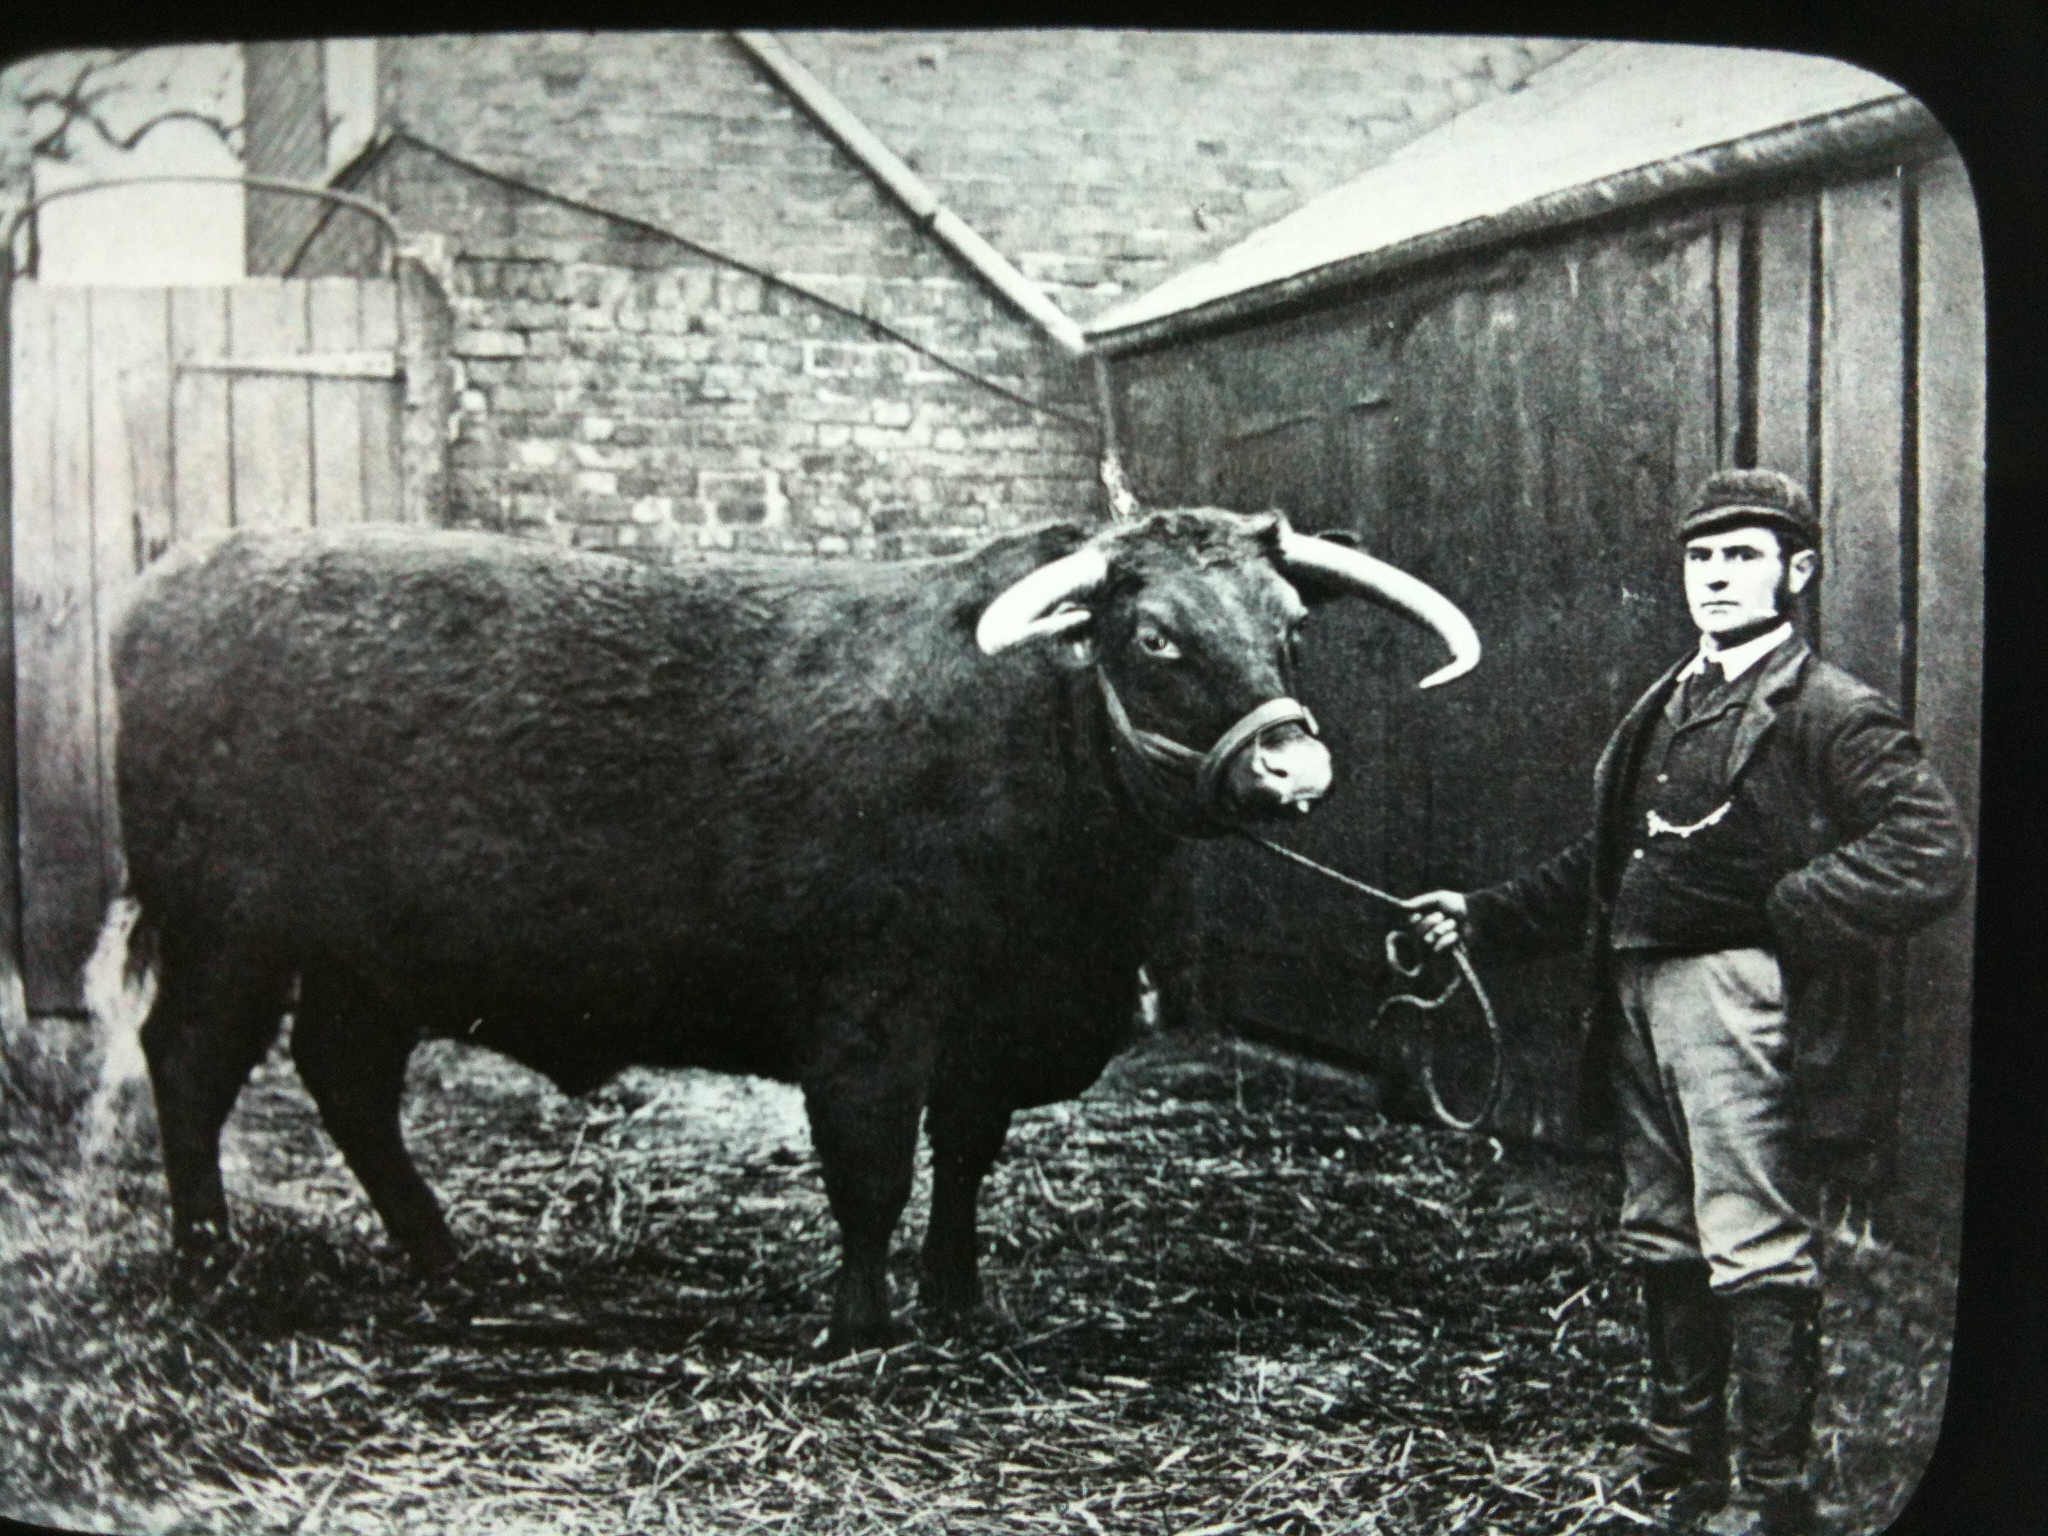 Man with Bull